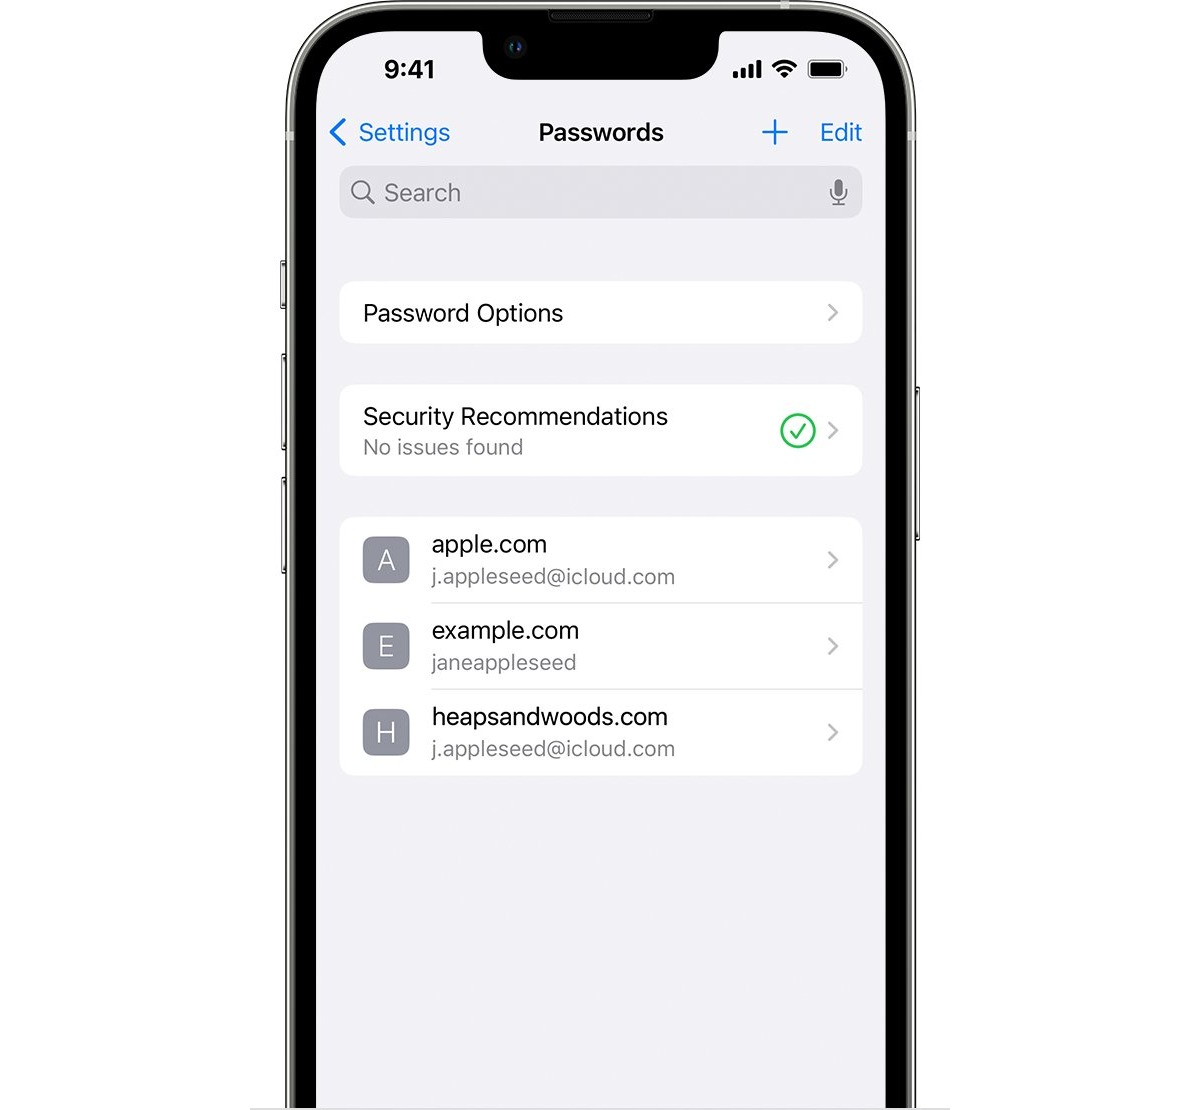 password-saving-storing-passwords-securely-on-iphone-10